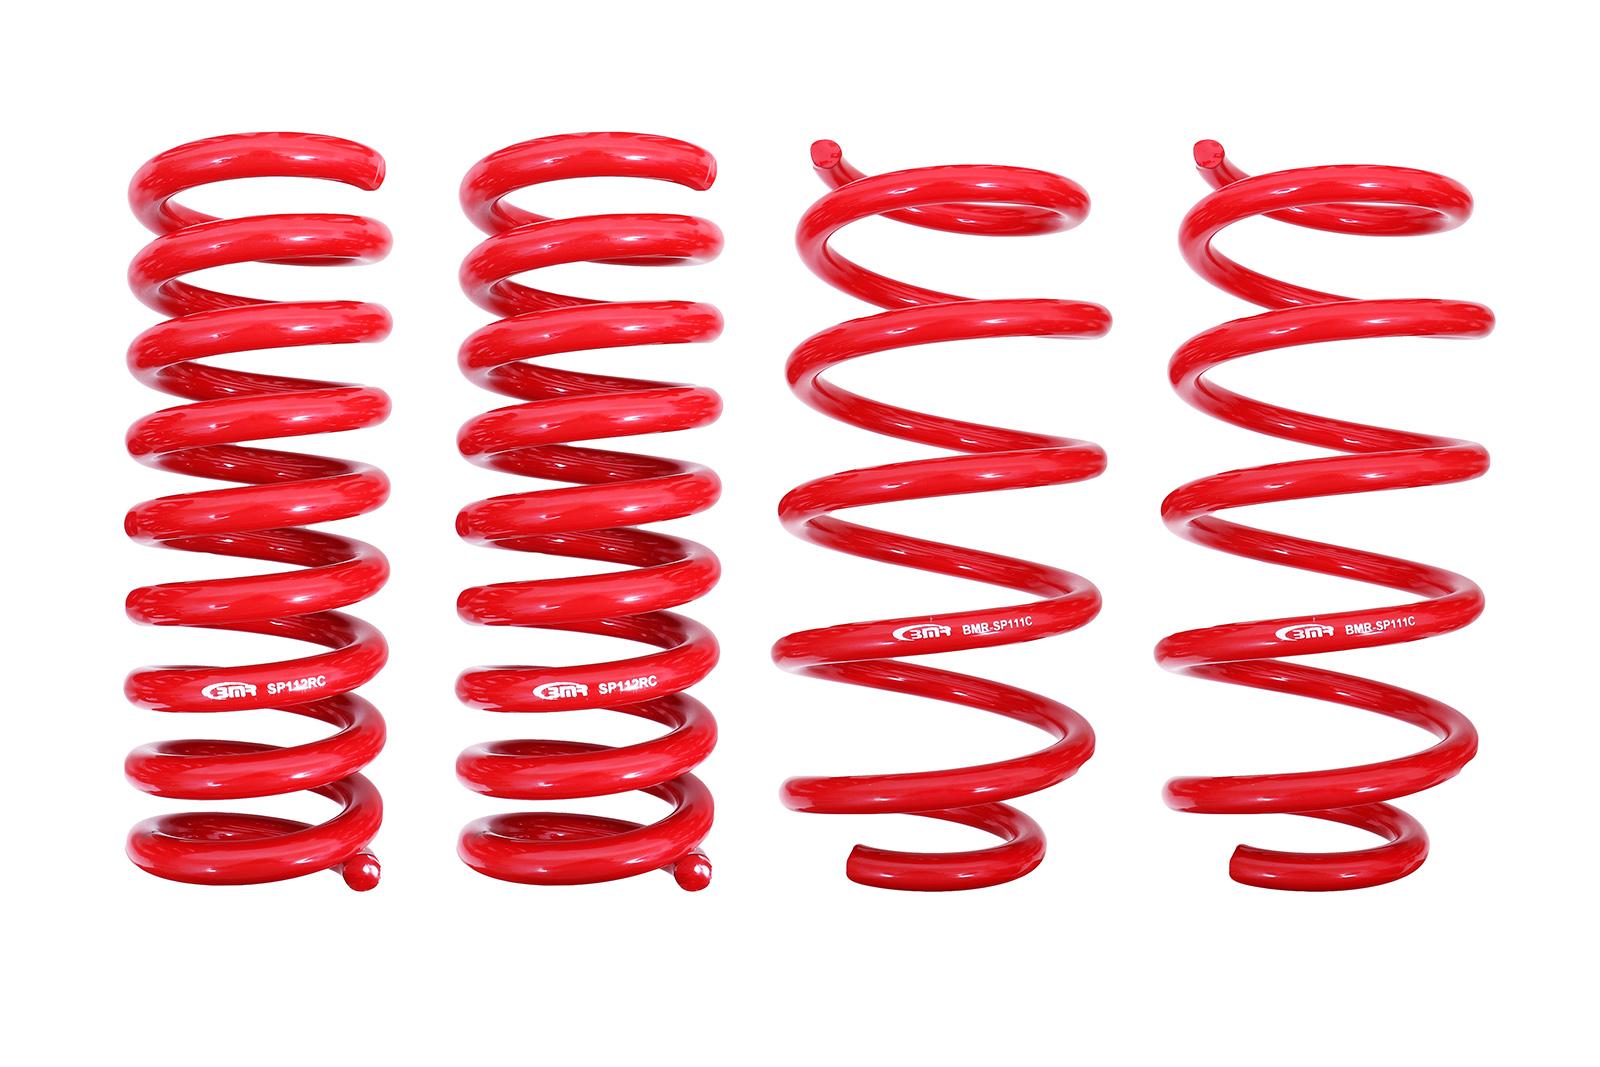 BMR Lowering Springs 1.25/" Coil Front Rear Red Camaro Firebird Set of 4